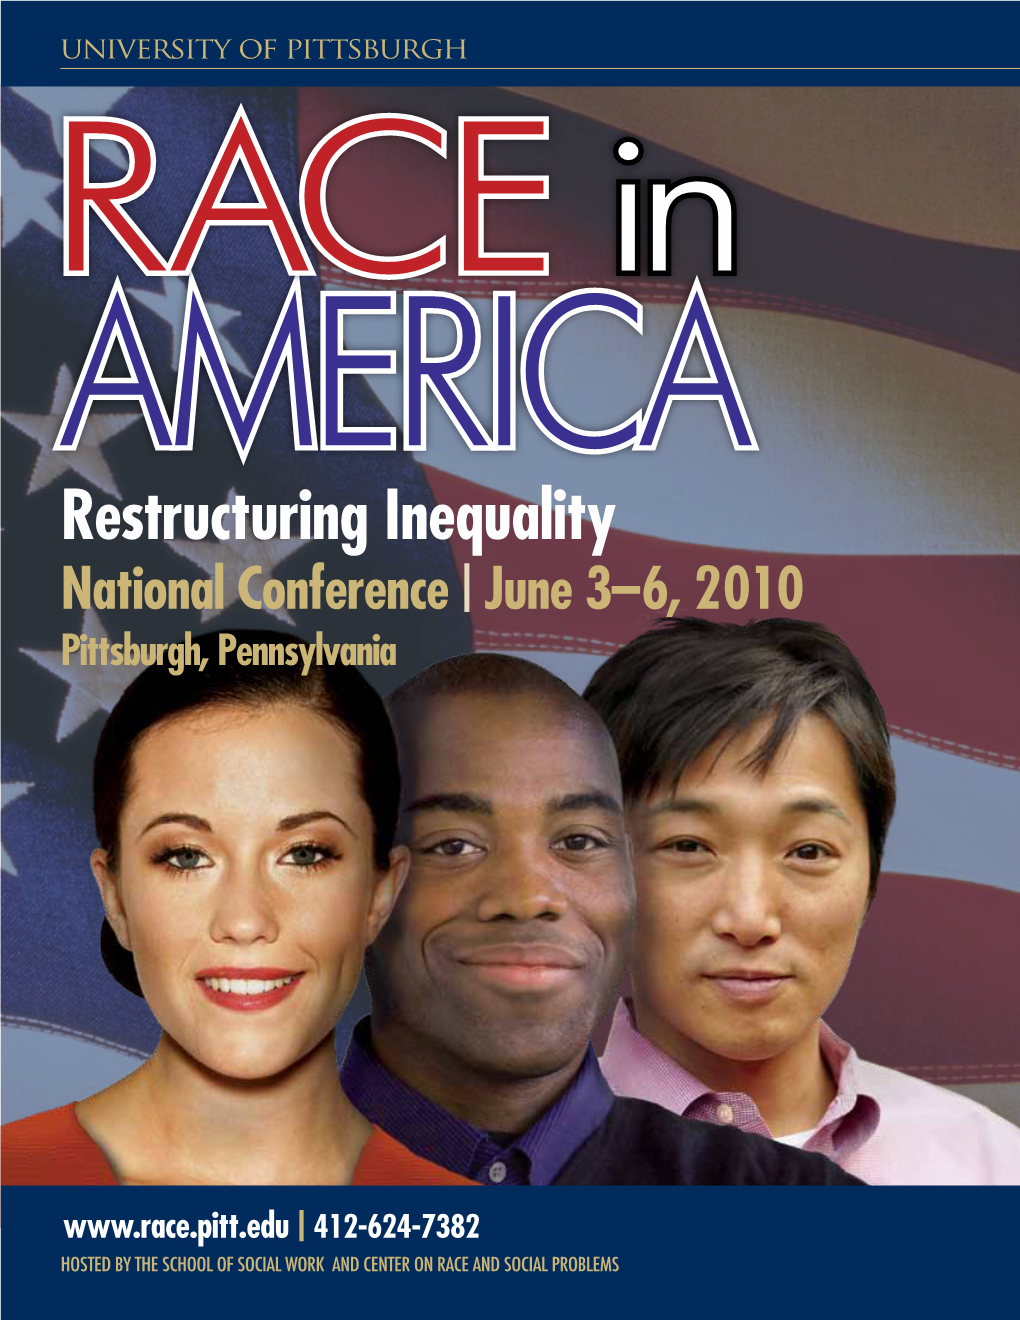 Restructuring Inequality National Conference | June 3–6, 2010 Pittsburgh, Pennsylvania